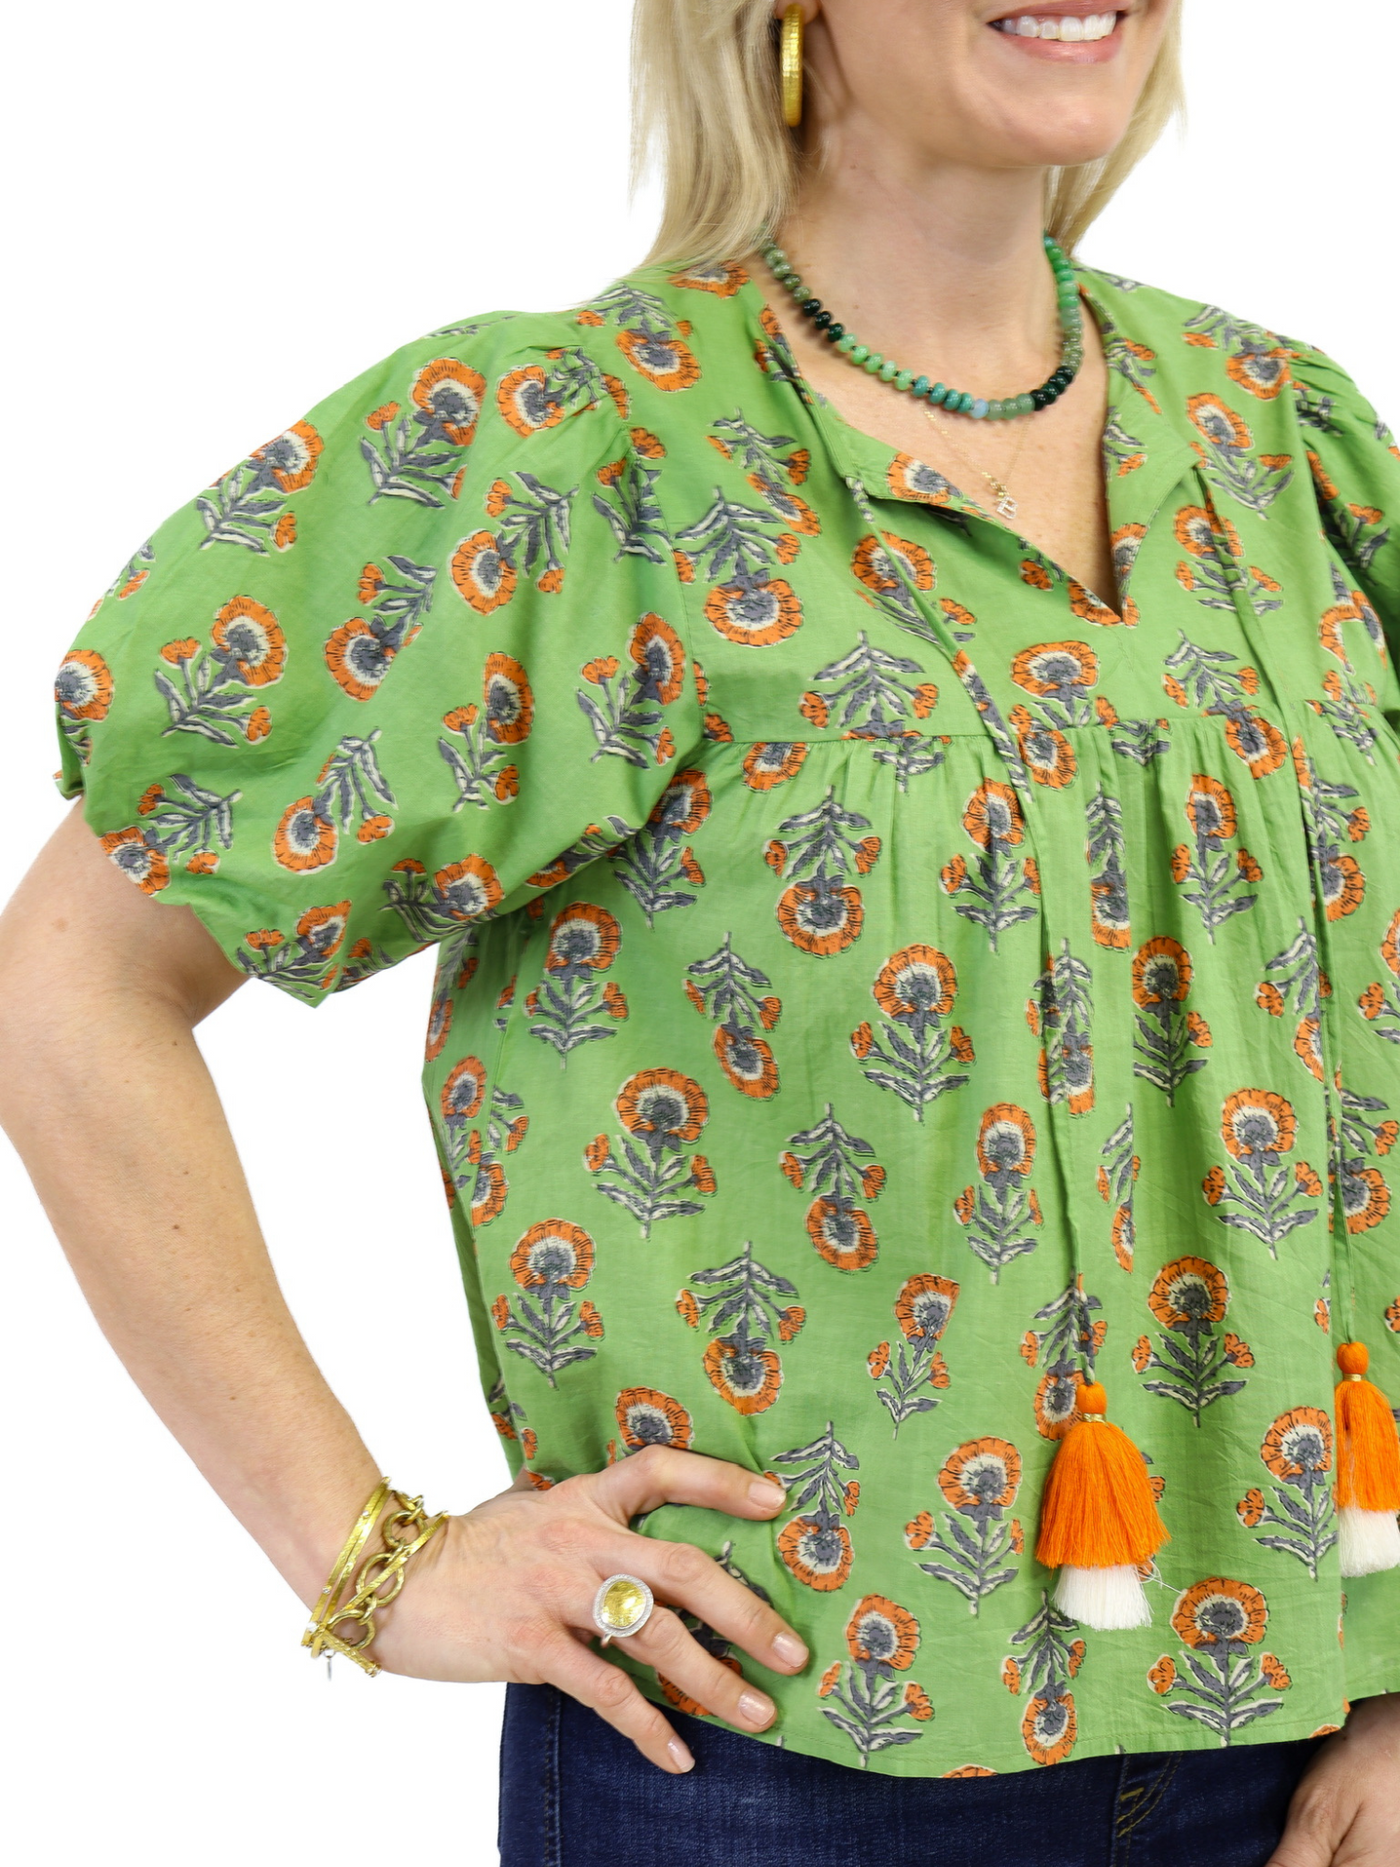 THML Tassel Tie Floral Top - Green/Orange up close view of print.